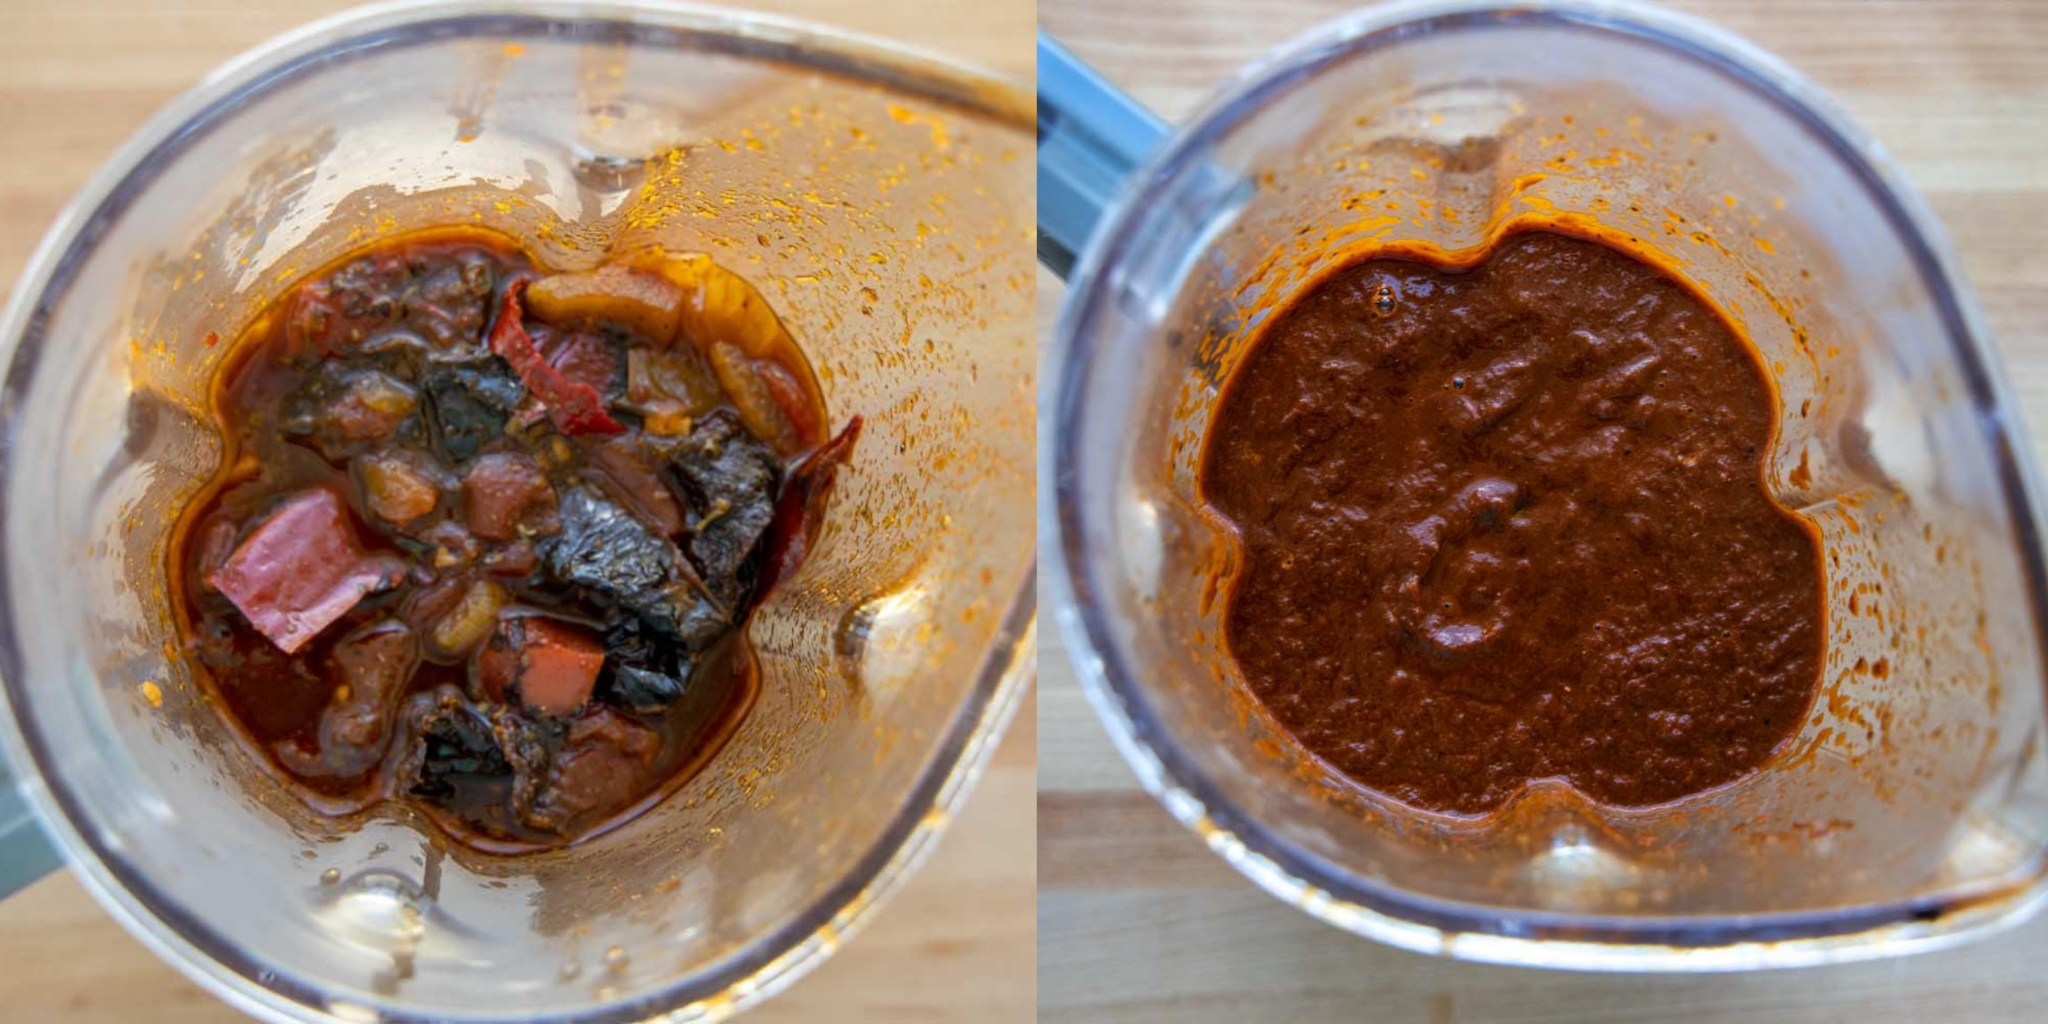 2 images one of the chili sauce ingredients in a blender and one of the fully blended ingredients in the blender